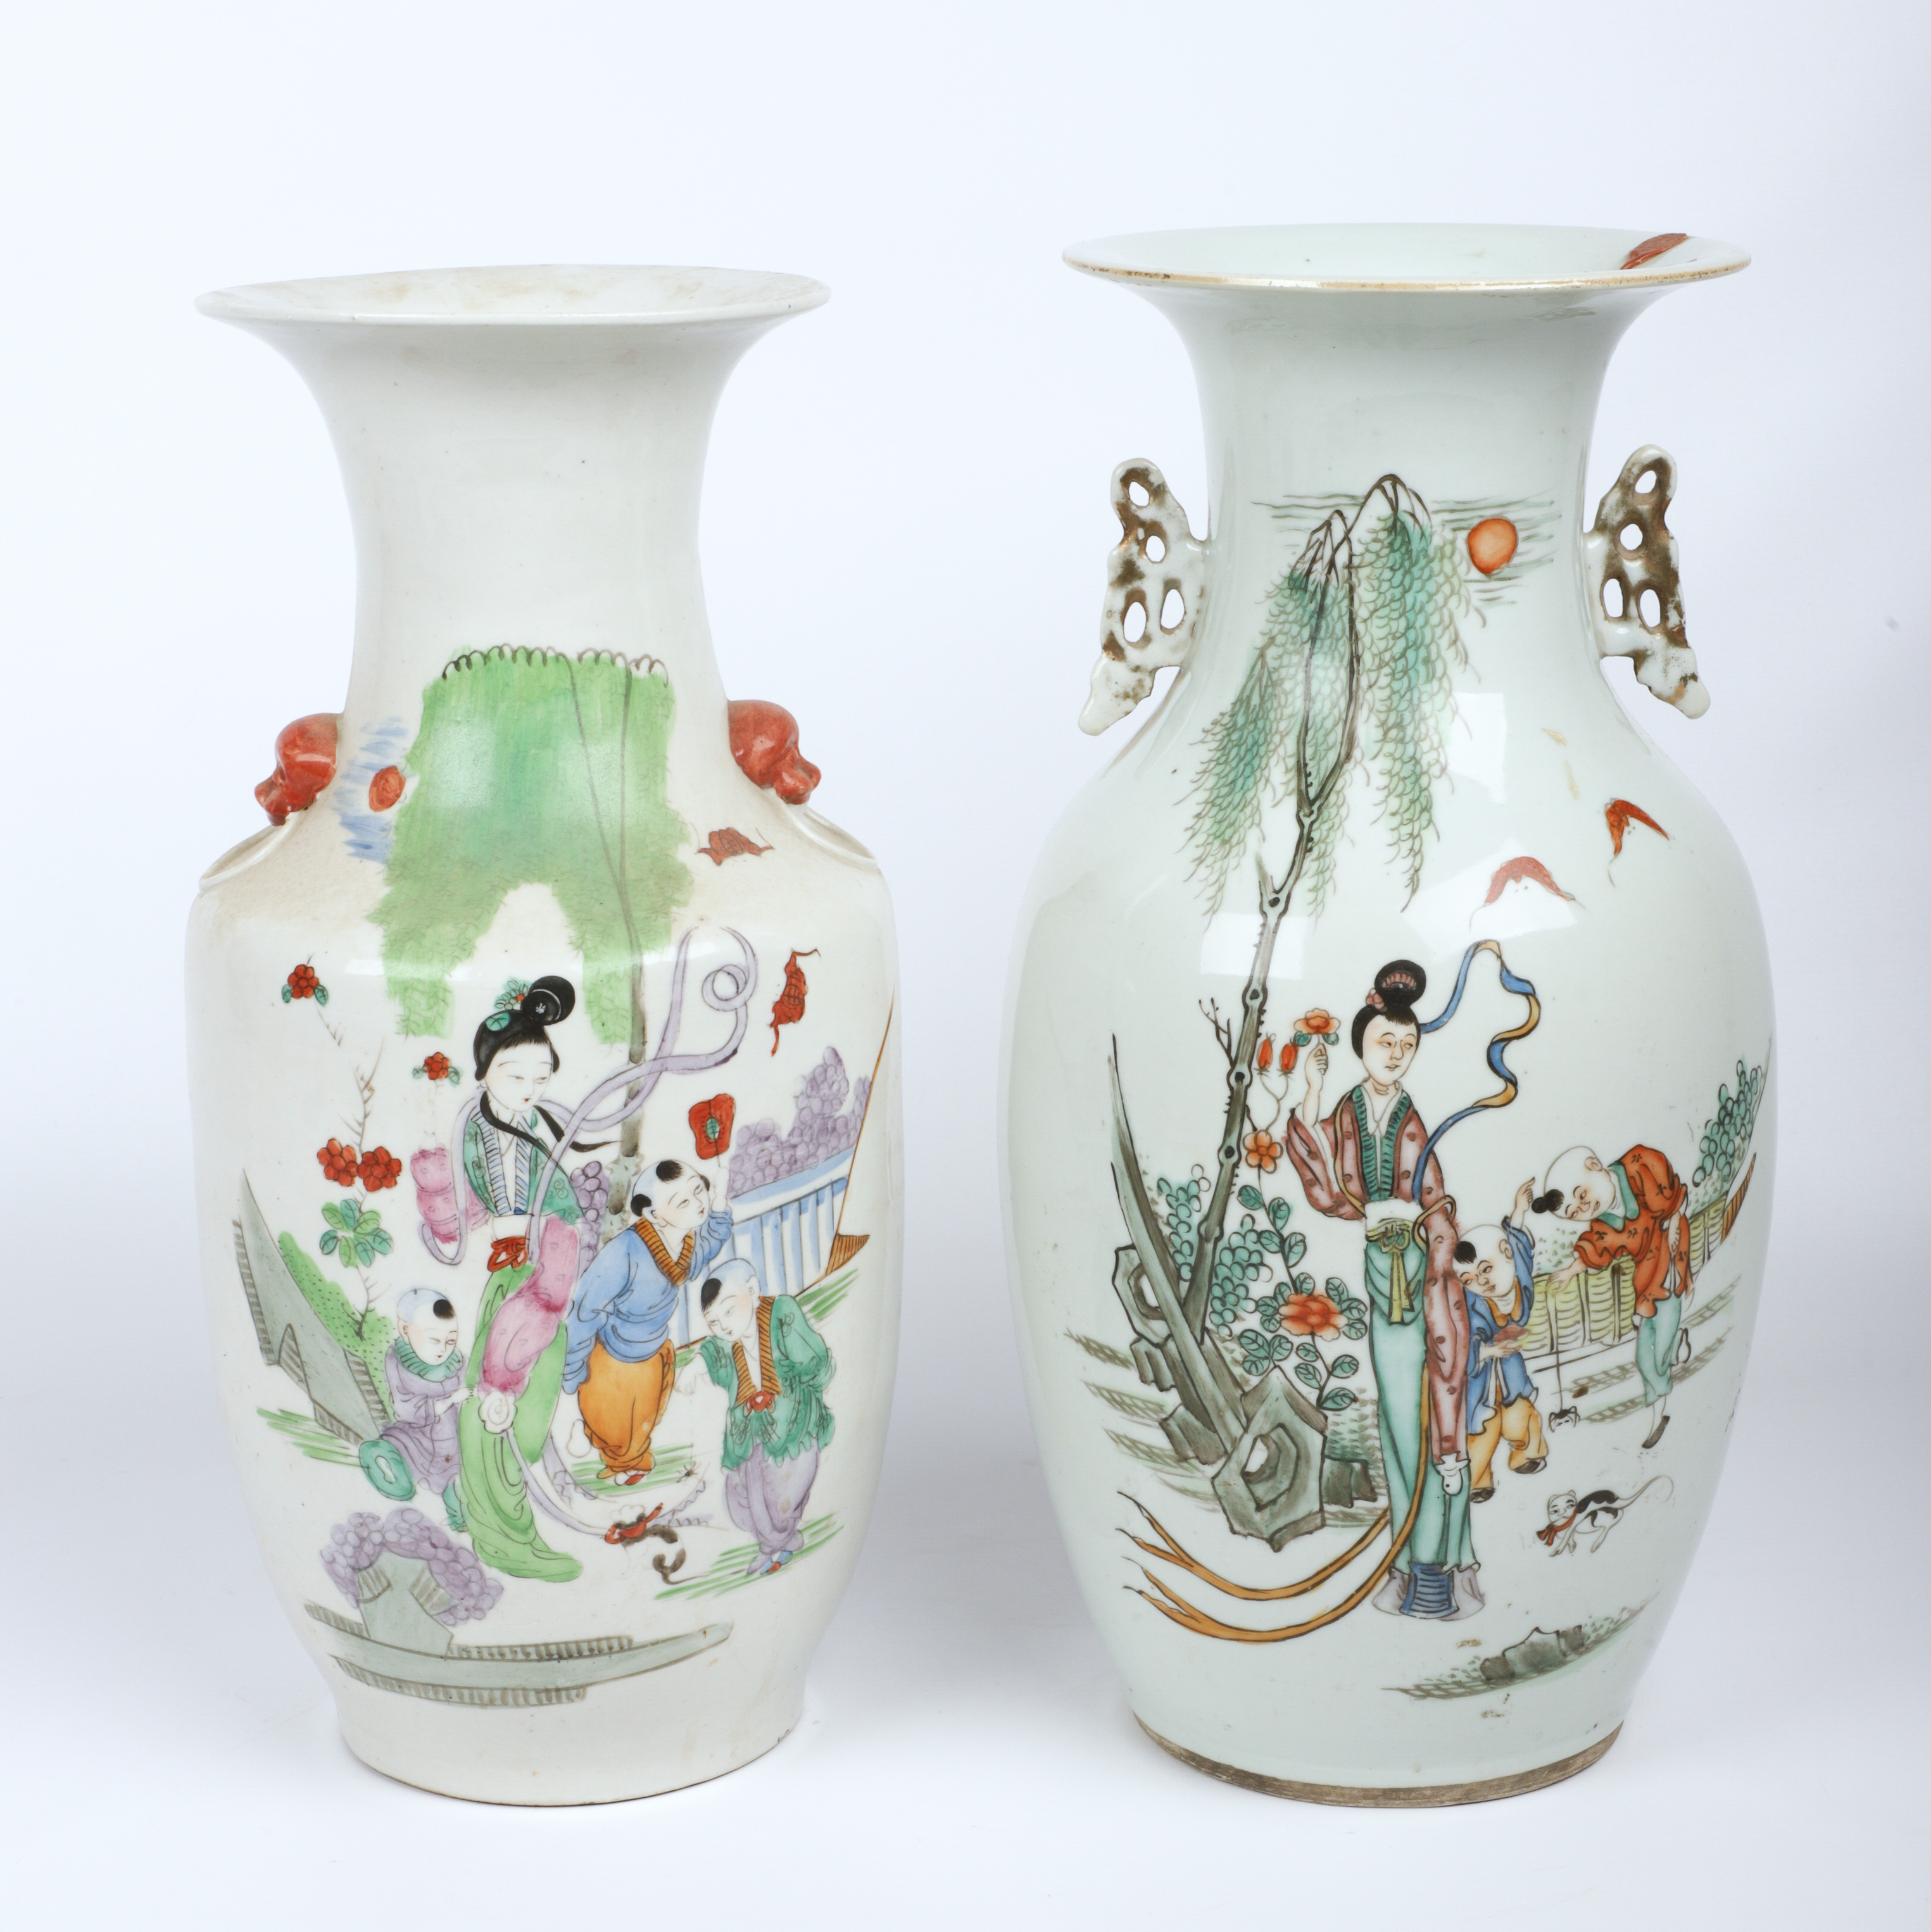  2 Chinese porcelain vases figures 3ca927